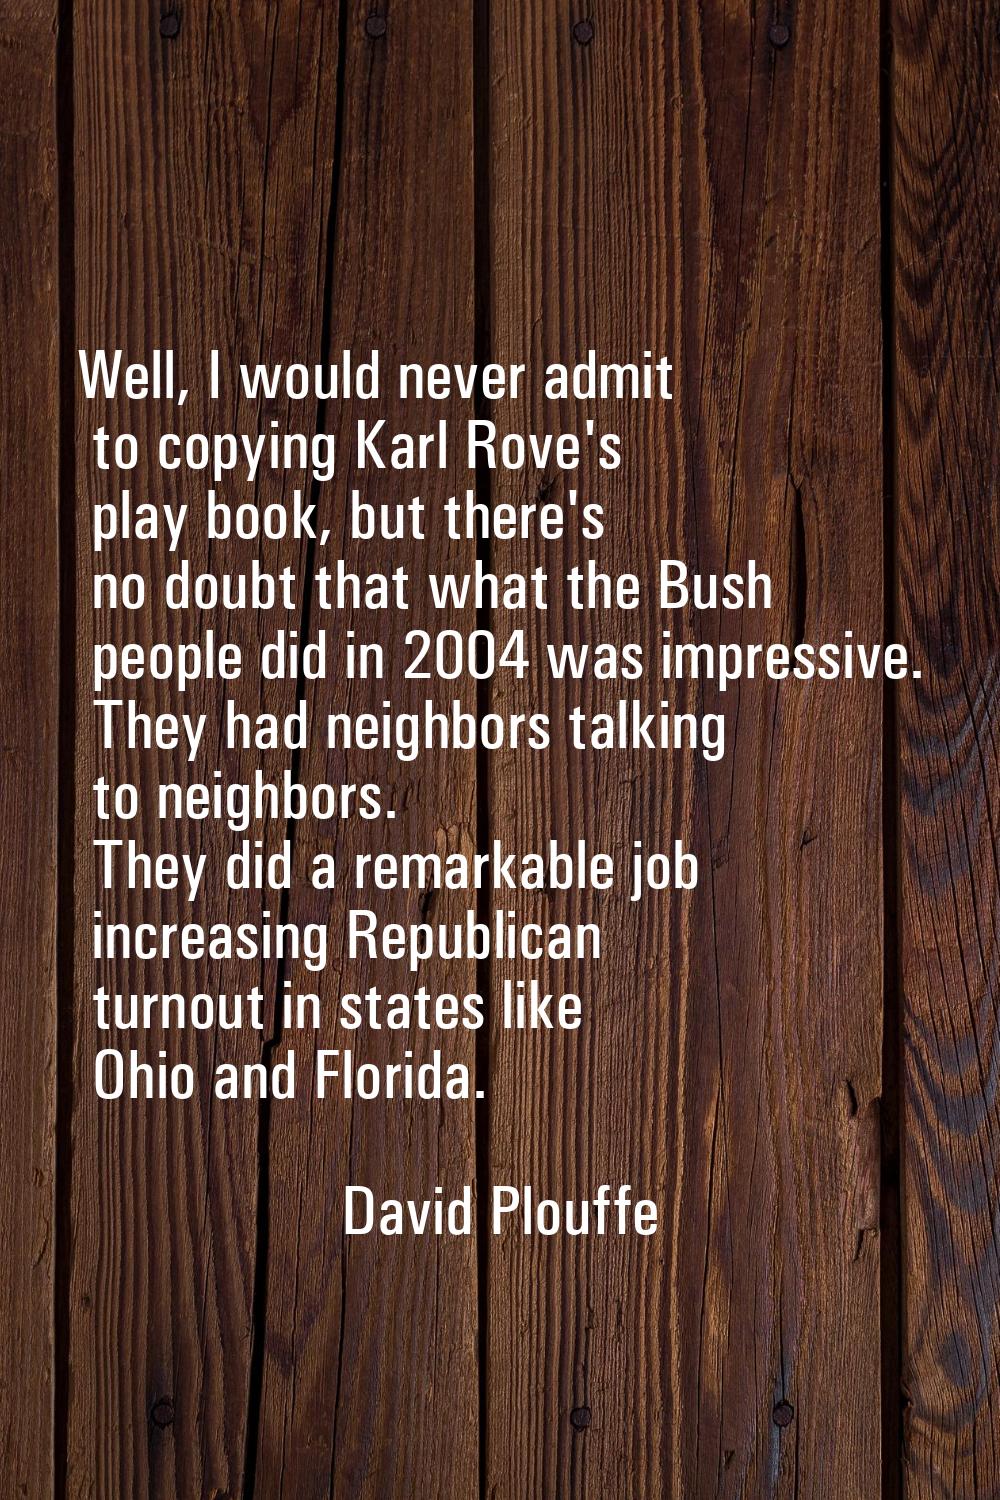 Well, I would never admit to copying Karl Rove's play book, but there's no doubt that what the Bush